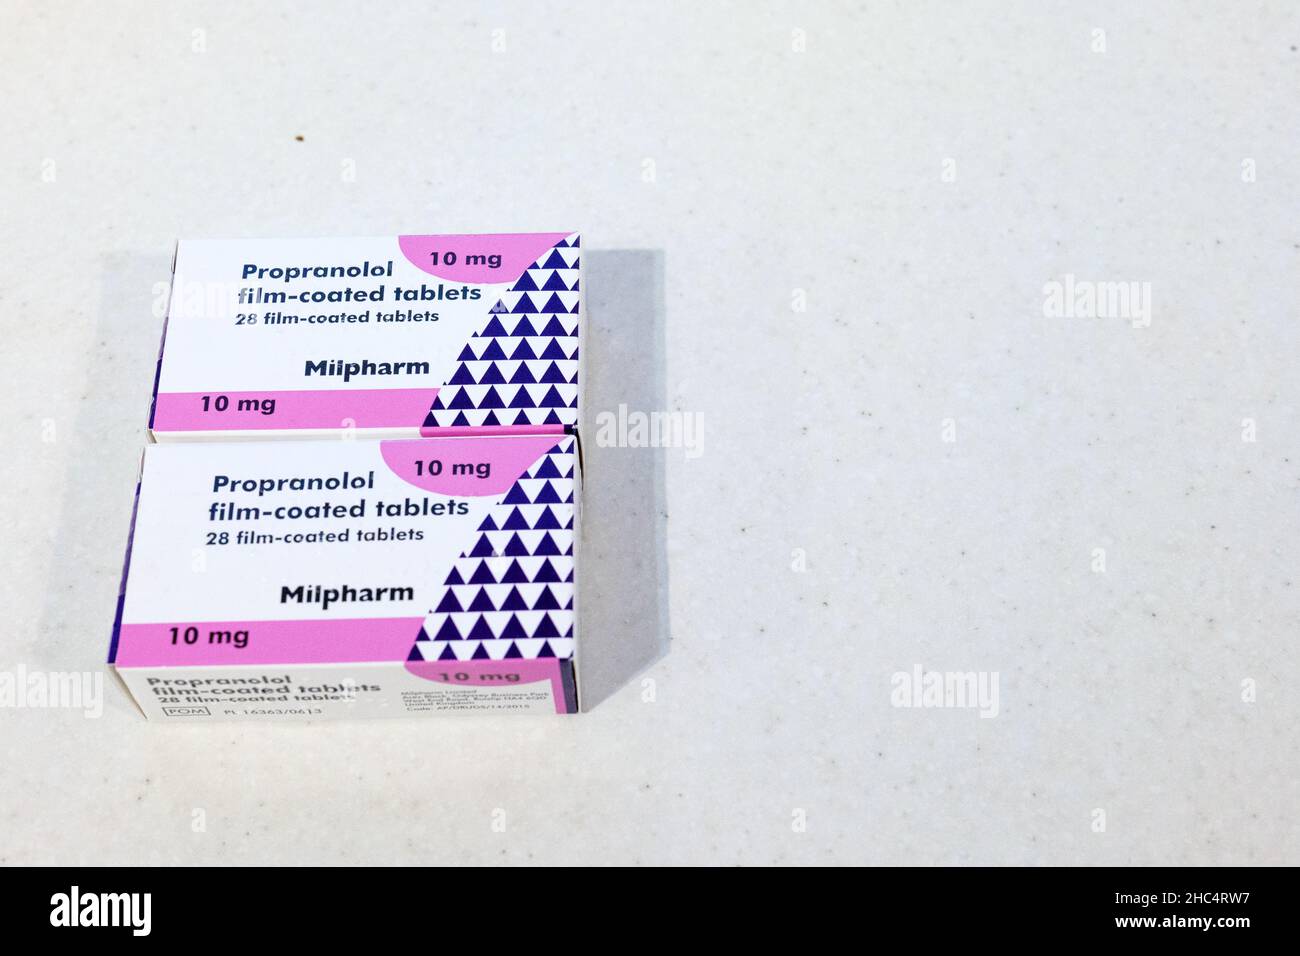 Propranolol, a beta blocker, often used in the treatement of high blood pressure, angina and anxiety. Stock Photo